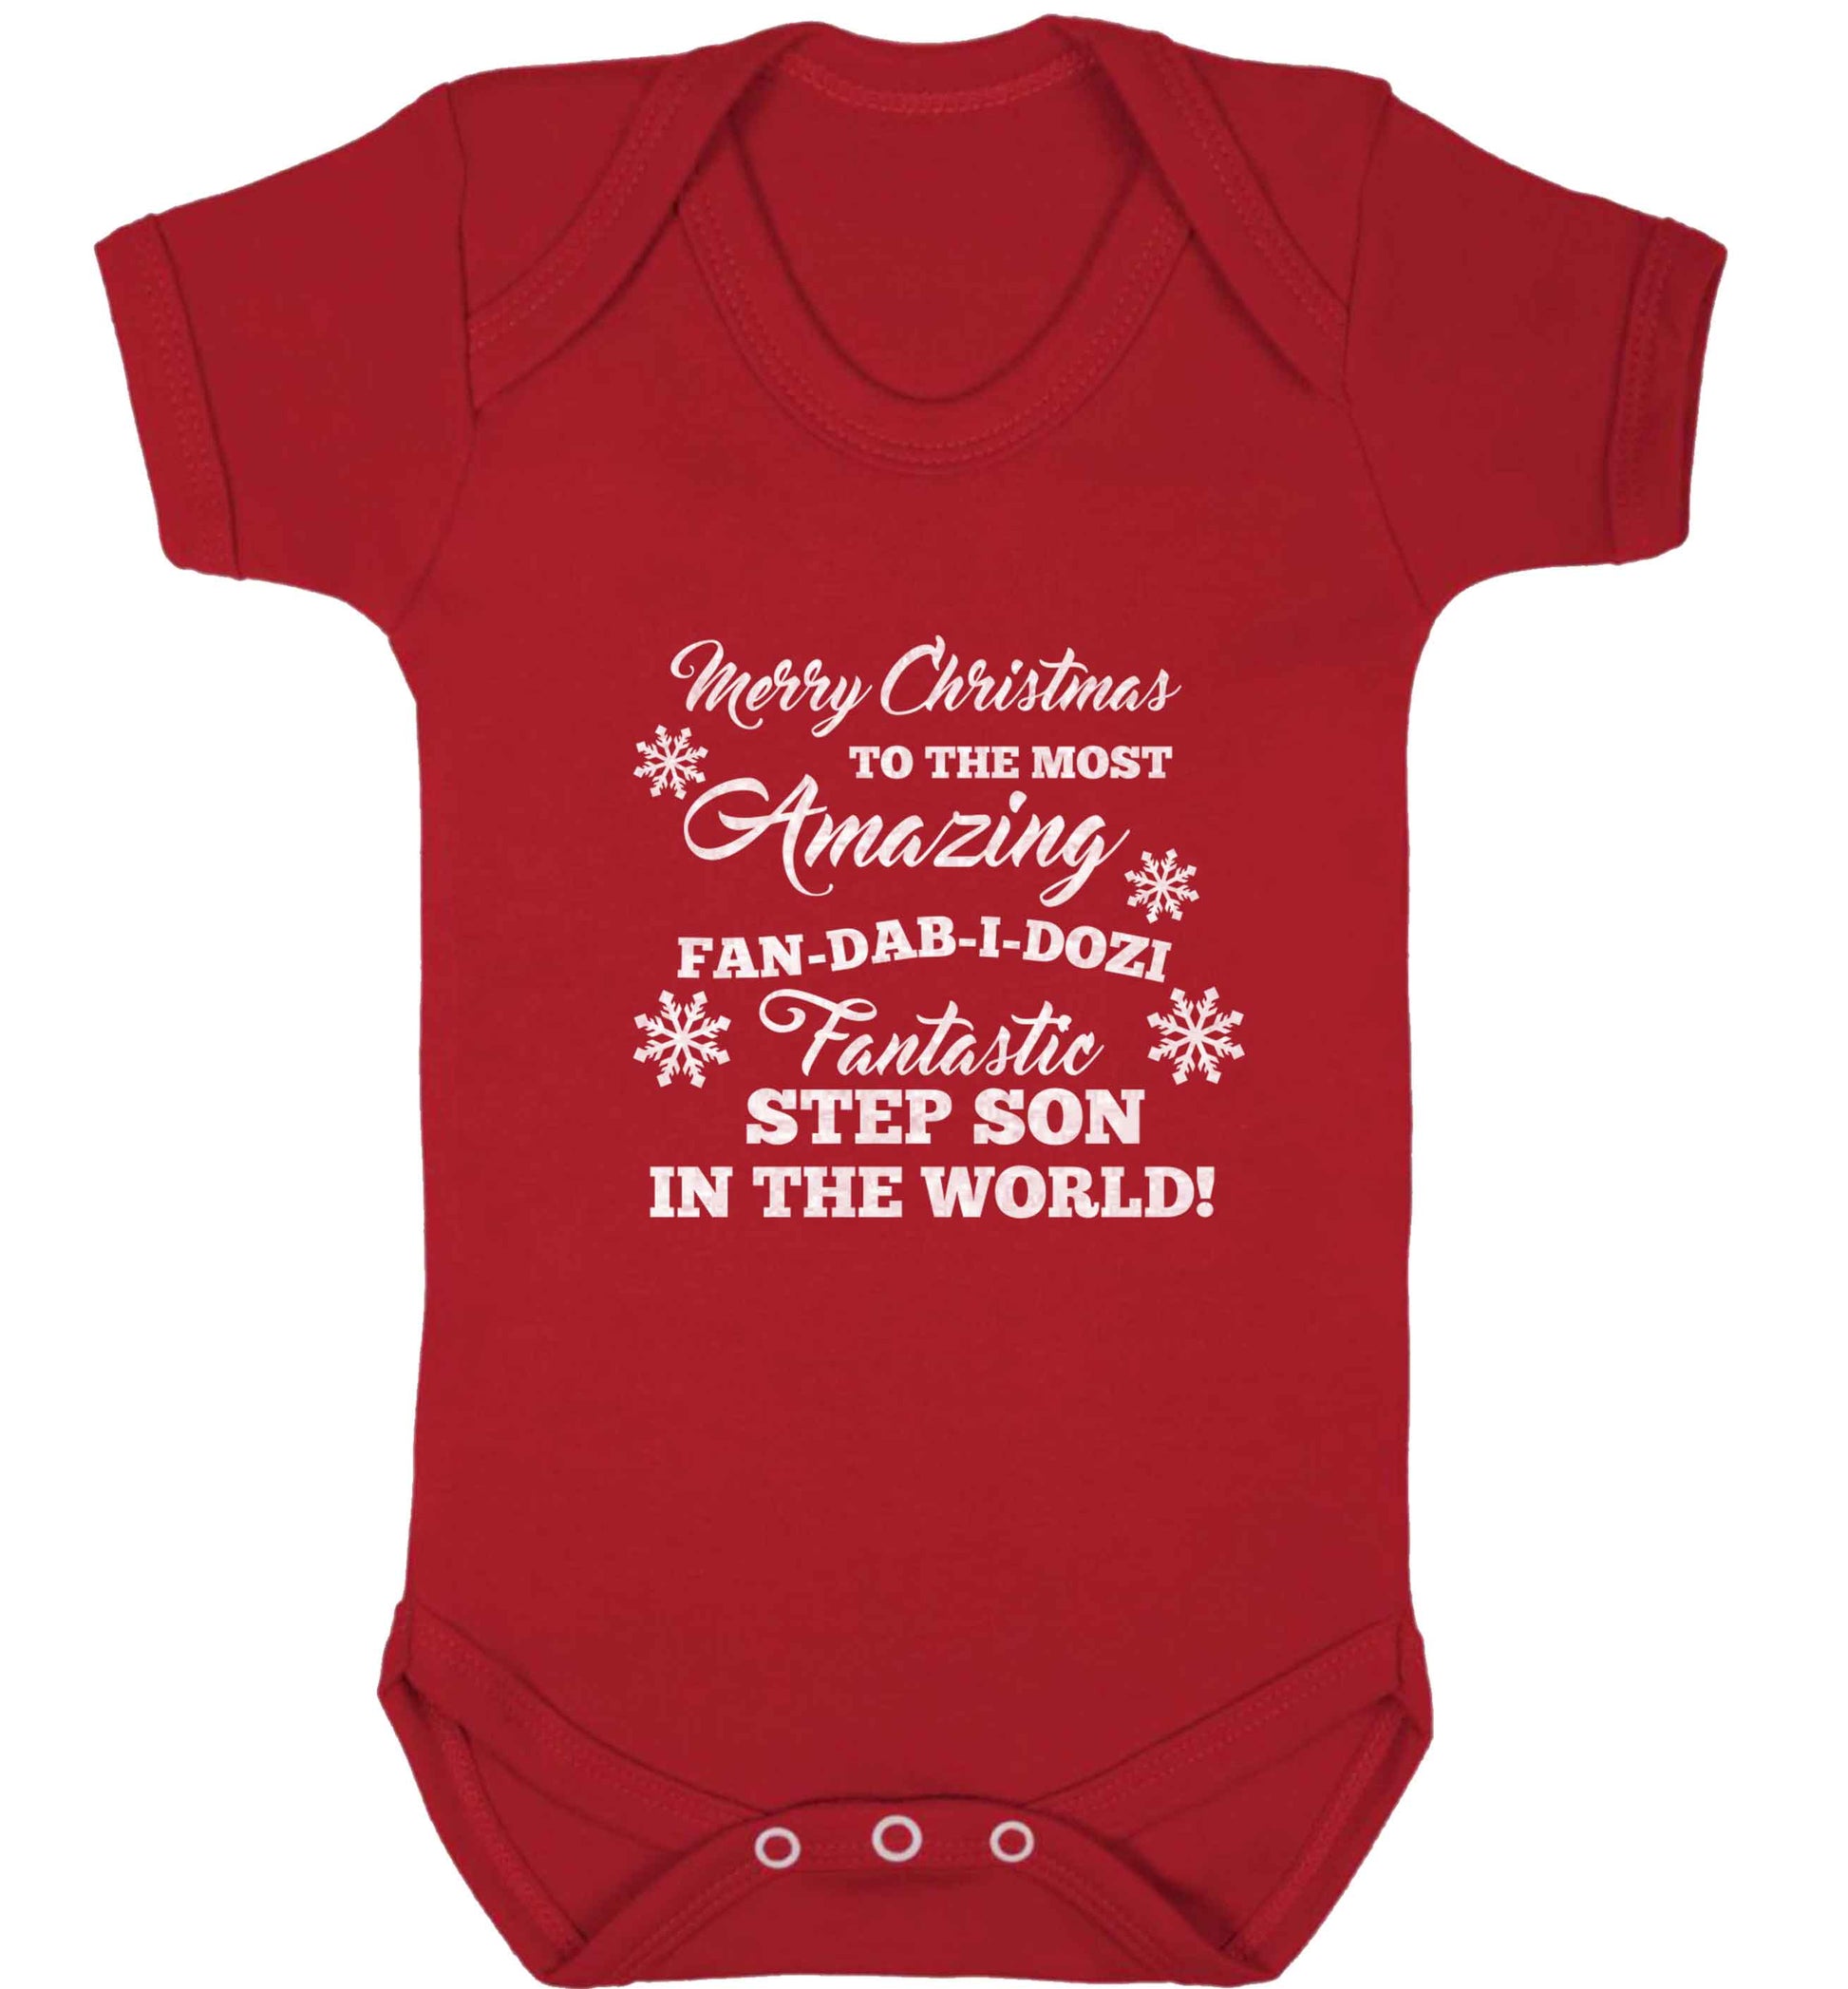 Merry Christmas to the most amazing fan-dab-i-dozi fantasic Step Son in the world baby vest red 18-24 months